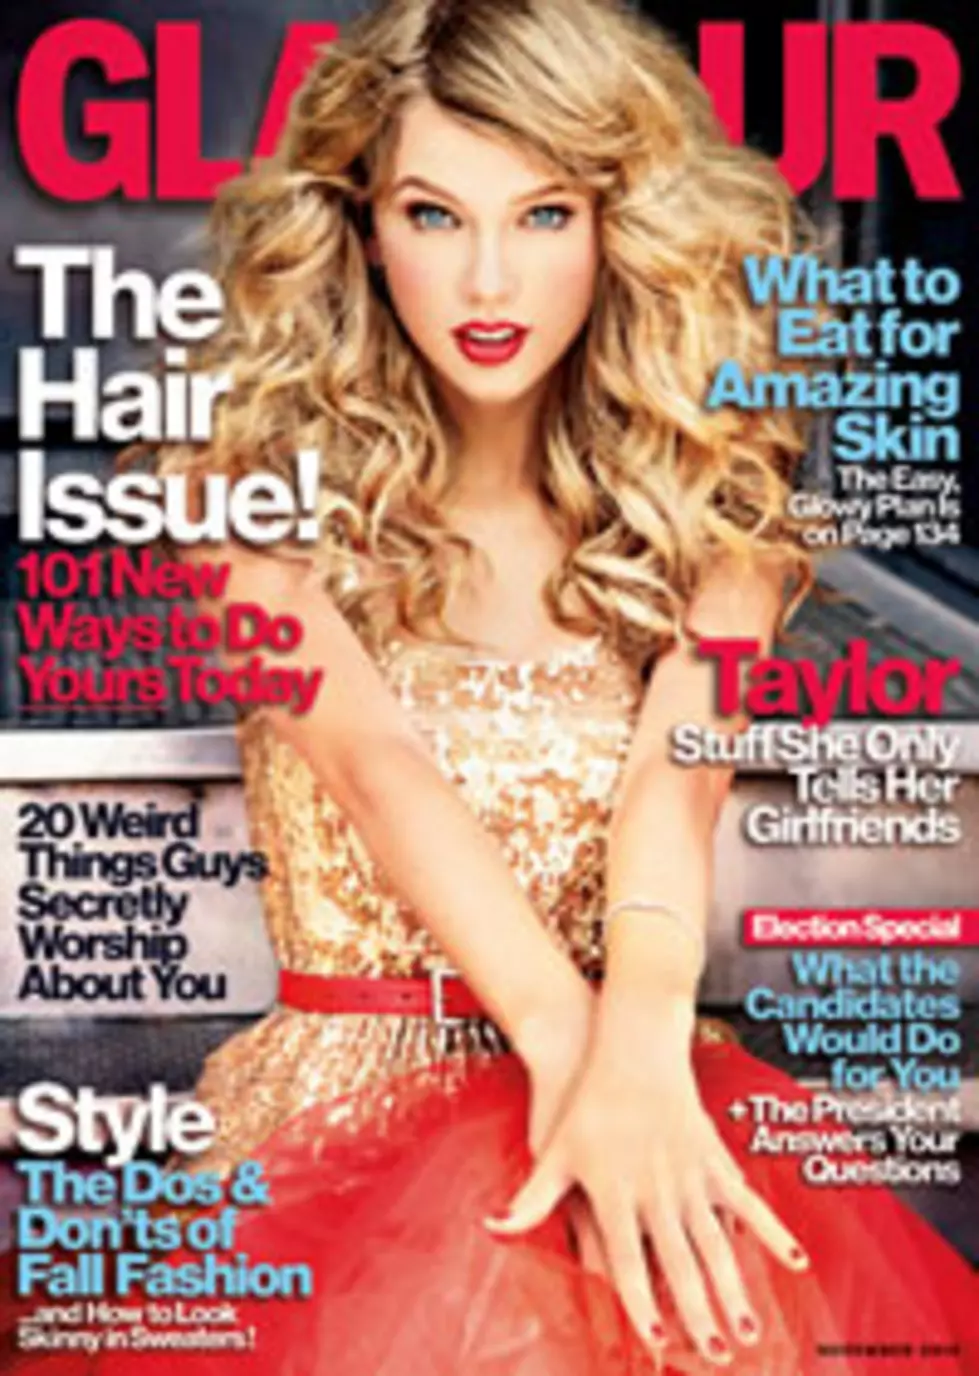 Taylor Swift ‘Glamour’ Cover: Singer Talks Gal Pals and John Mayer